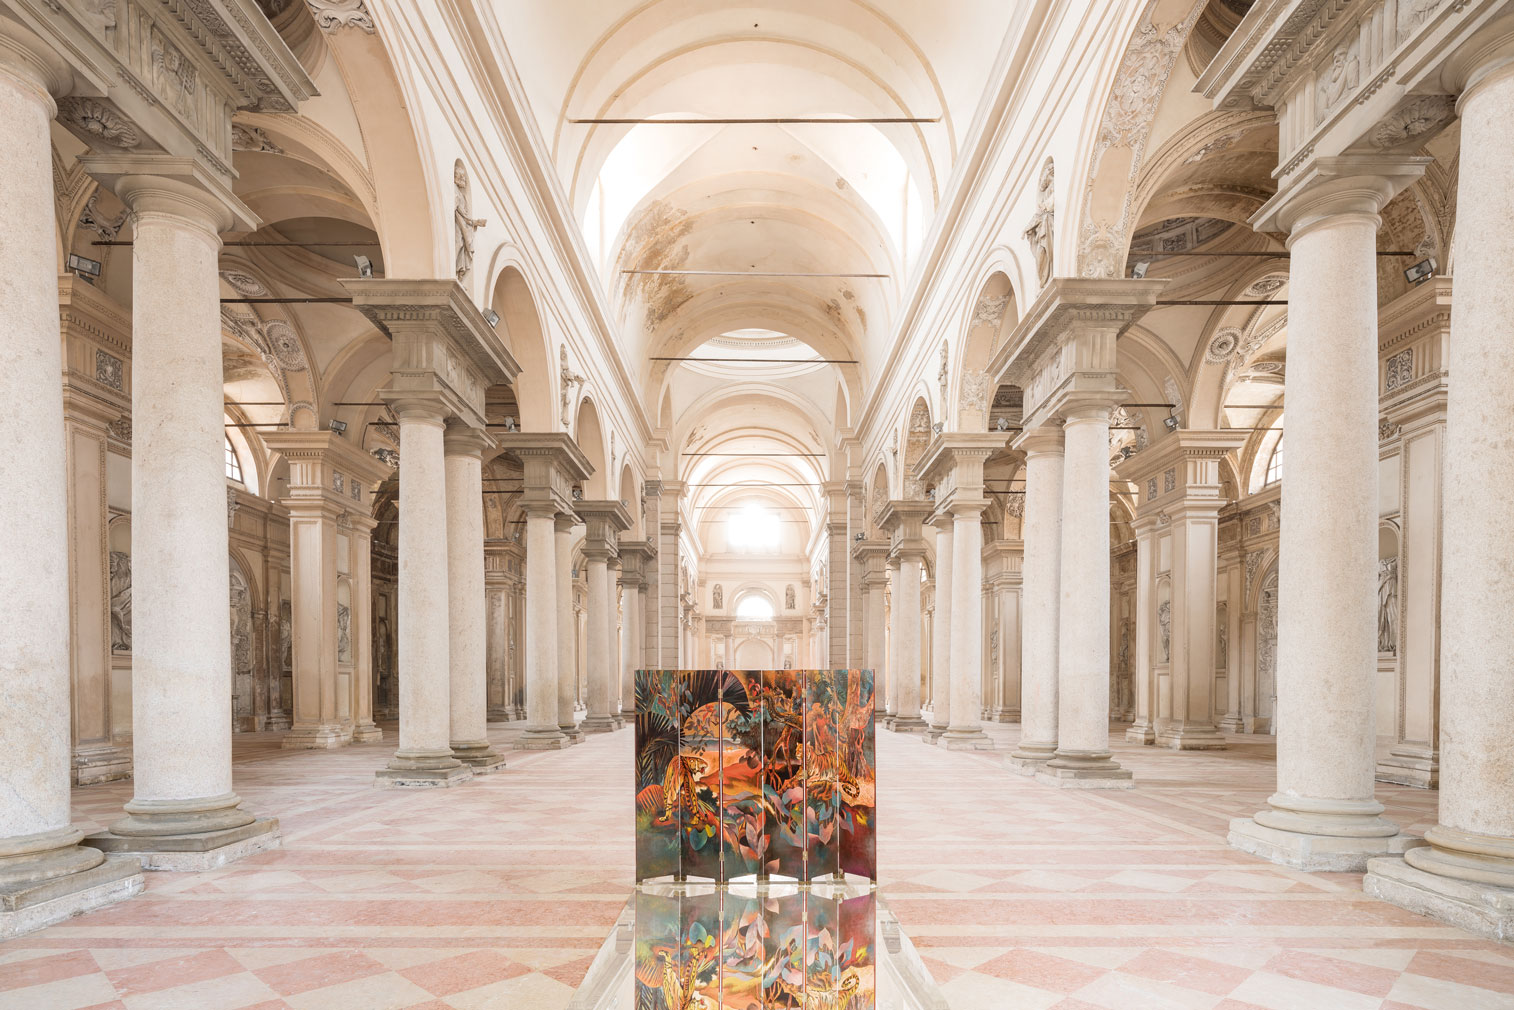 A disused church in Piacenza has been reborn as an art gallery